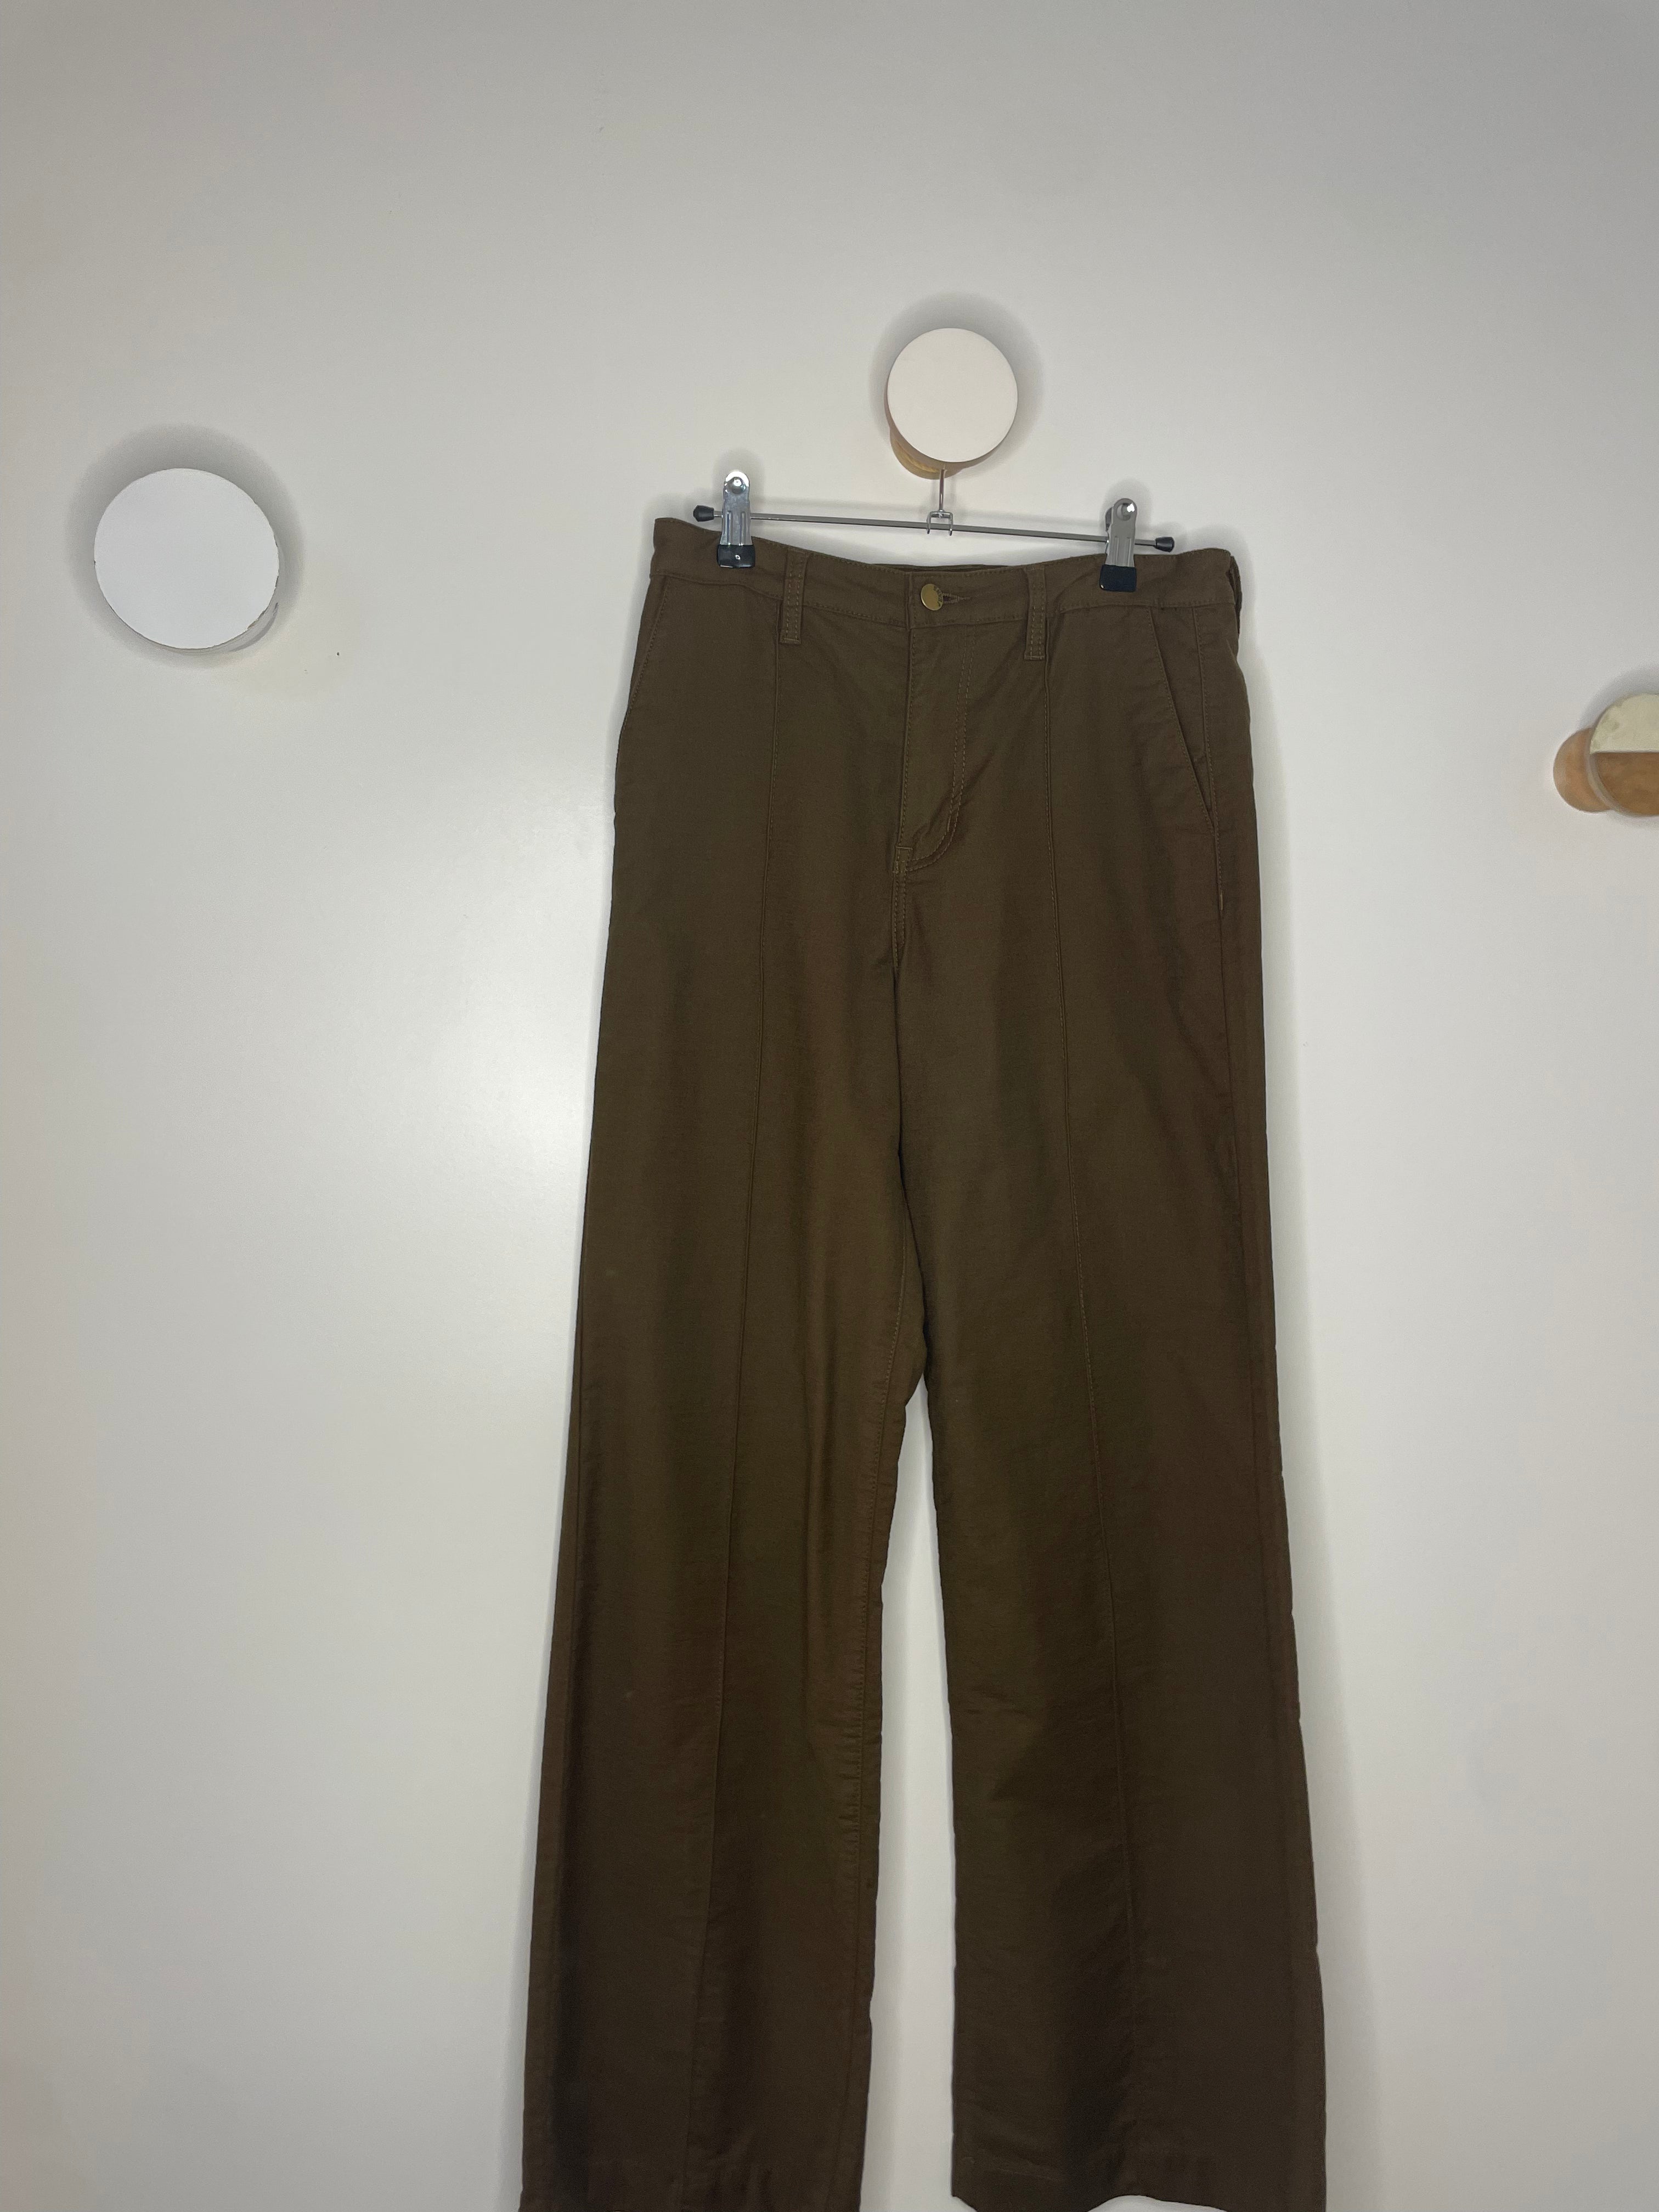 Wide Leg Pant in Chocolate